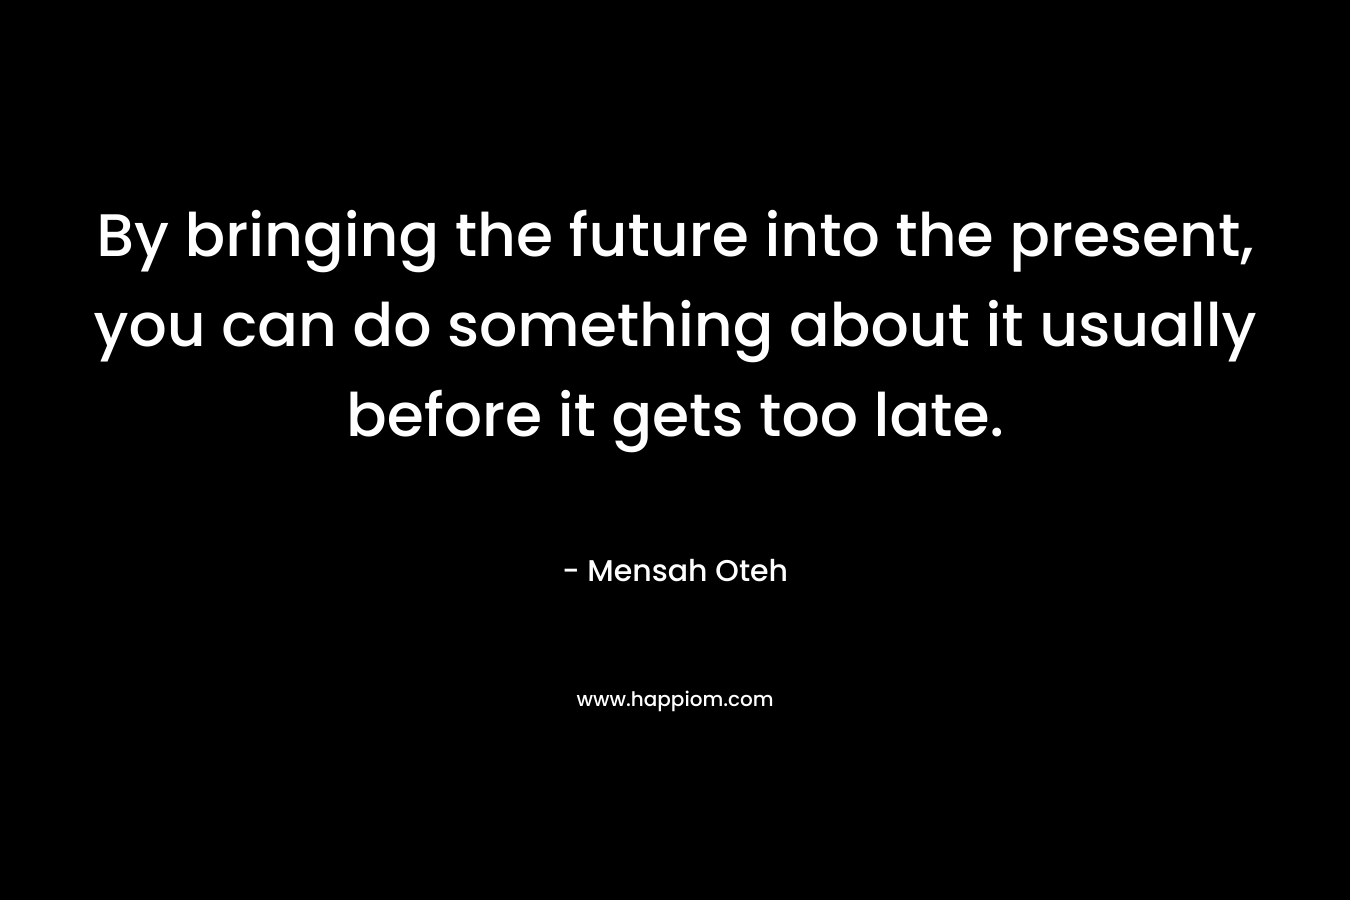 By bringing the future into the present, you can do something about it usually before it gets too late.